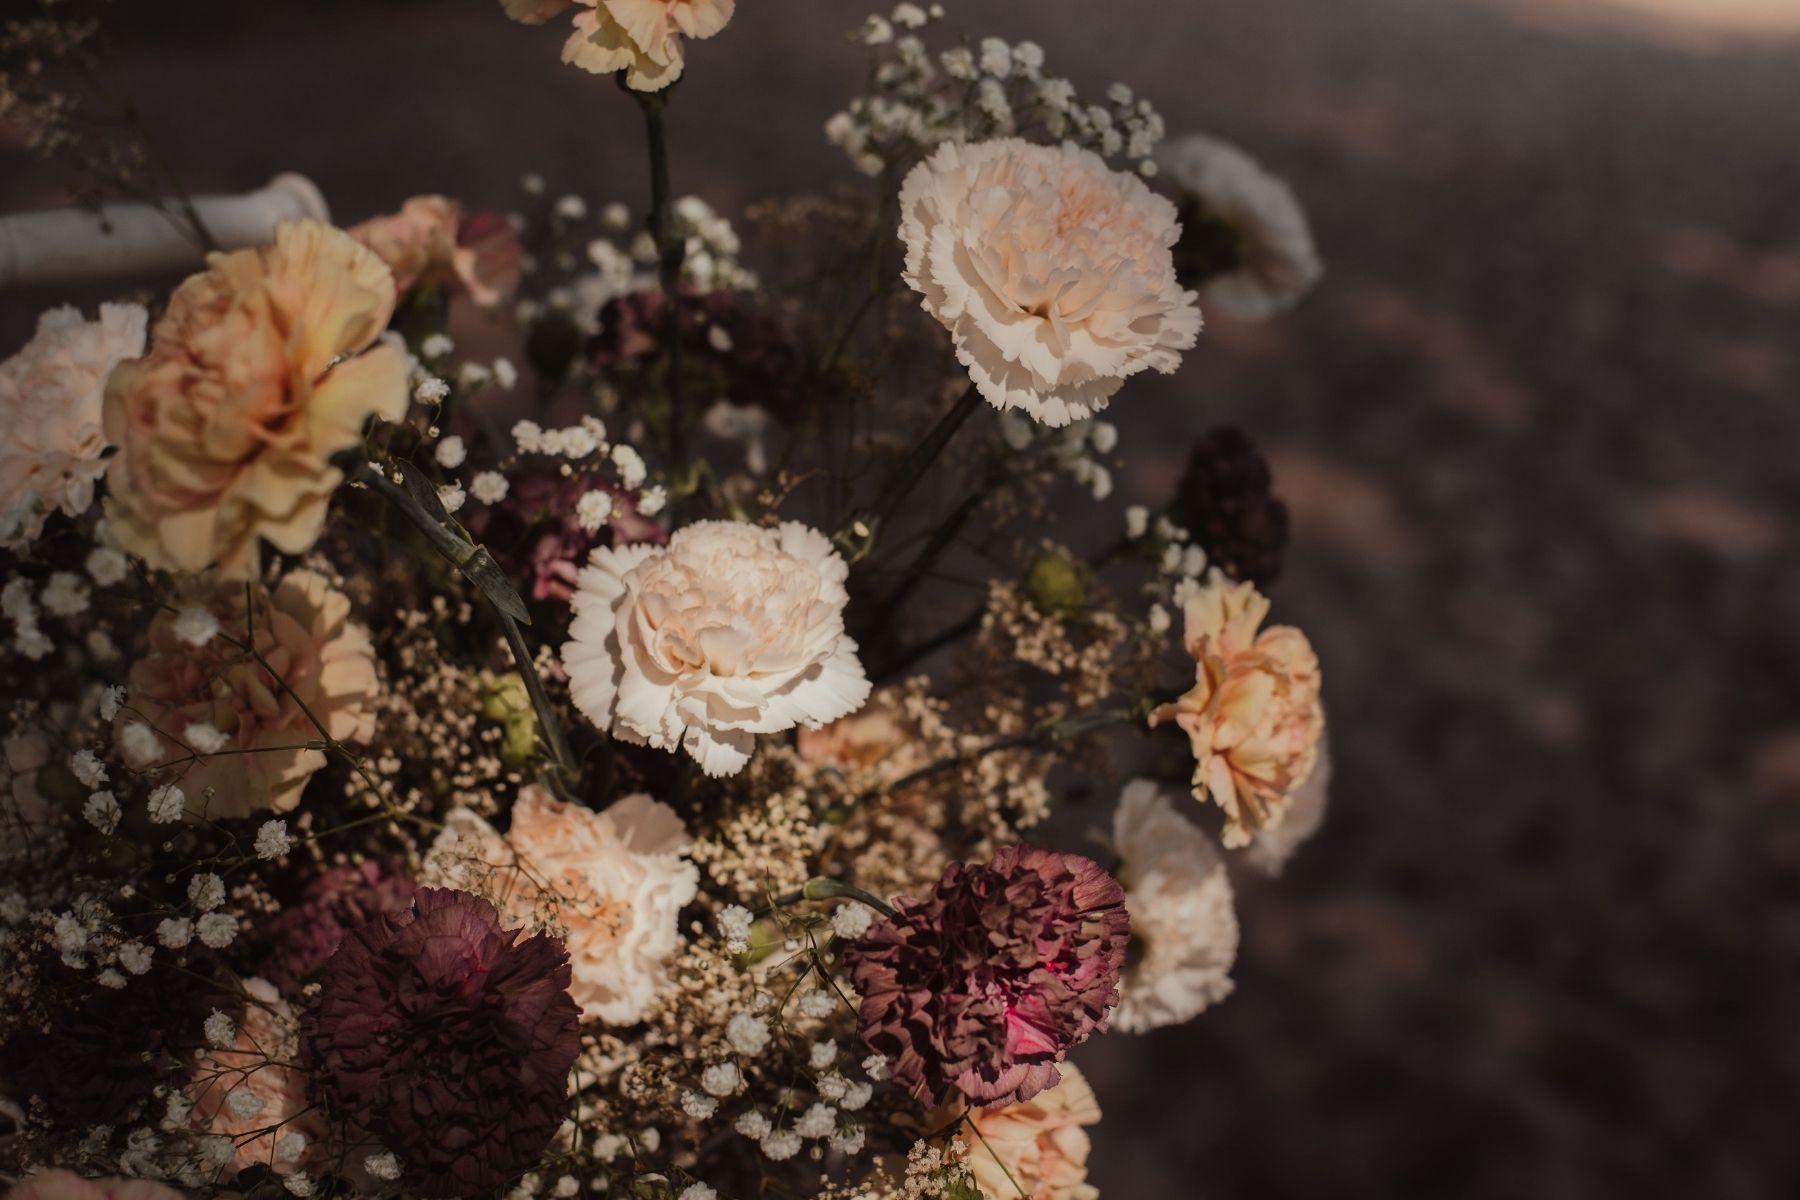 Inspirational Shoot With Gorgeous Decofresh Roses and Carnations - Blog on Thursd (16)